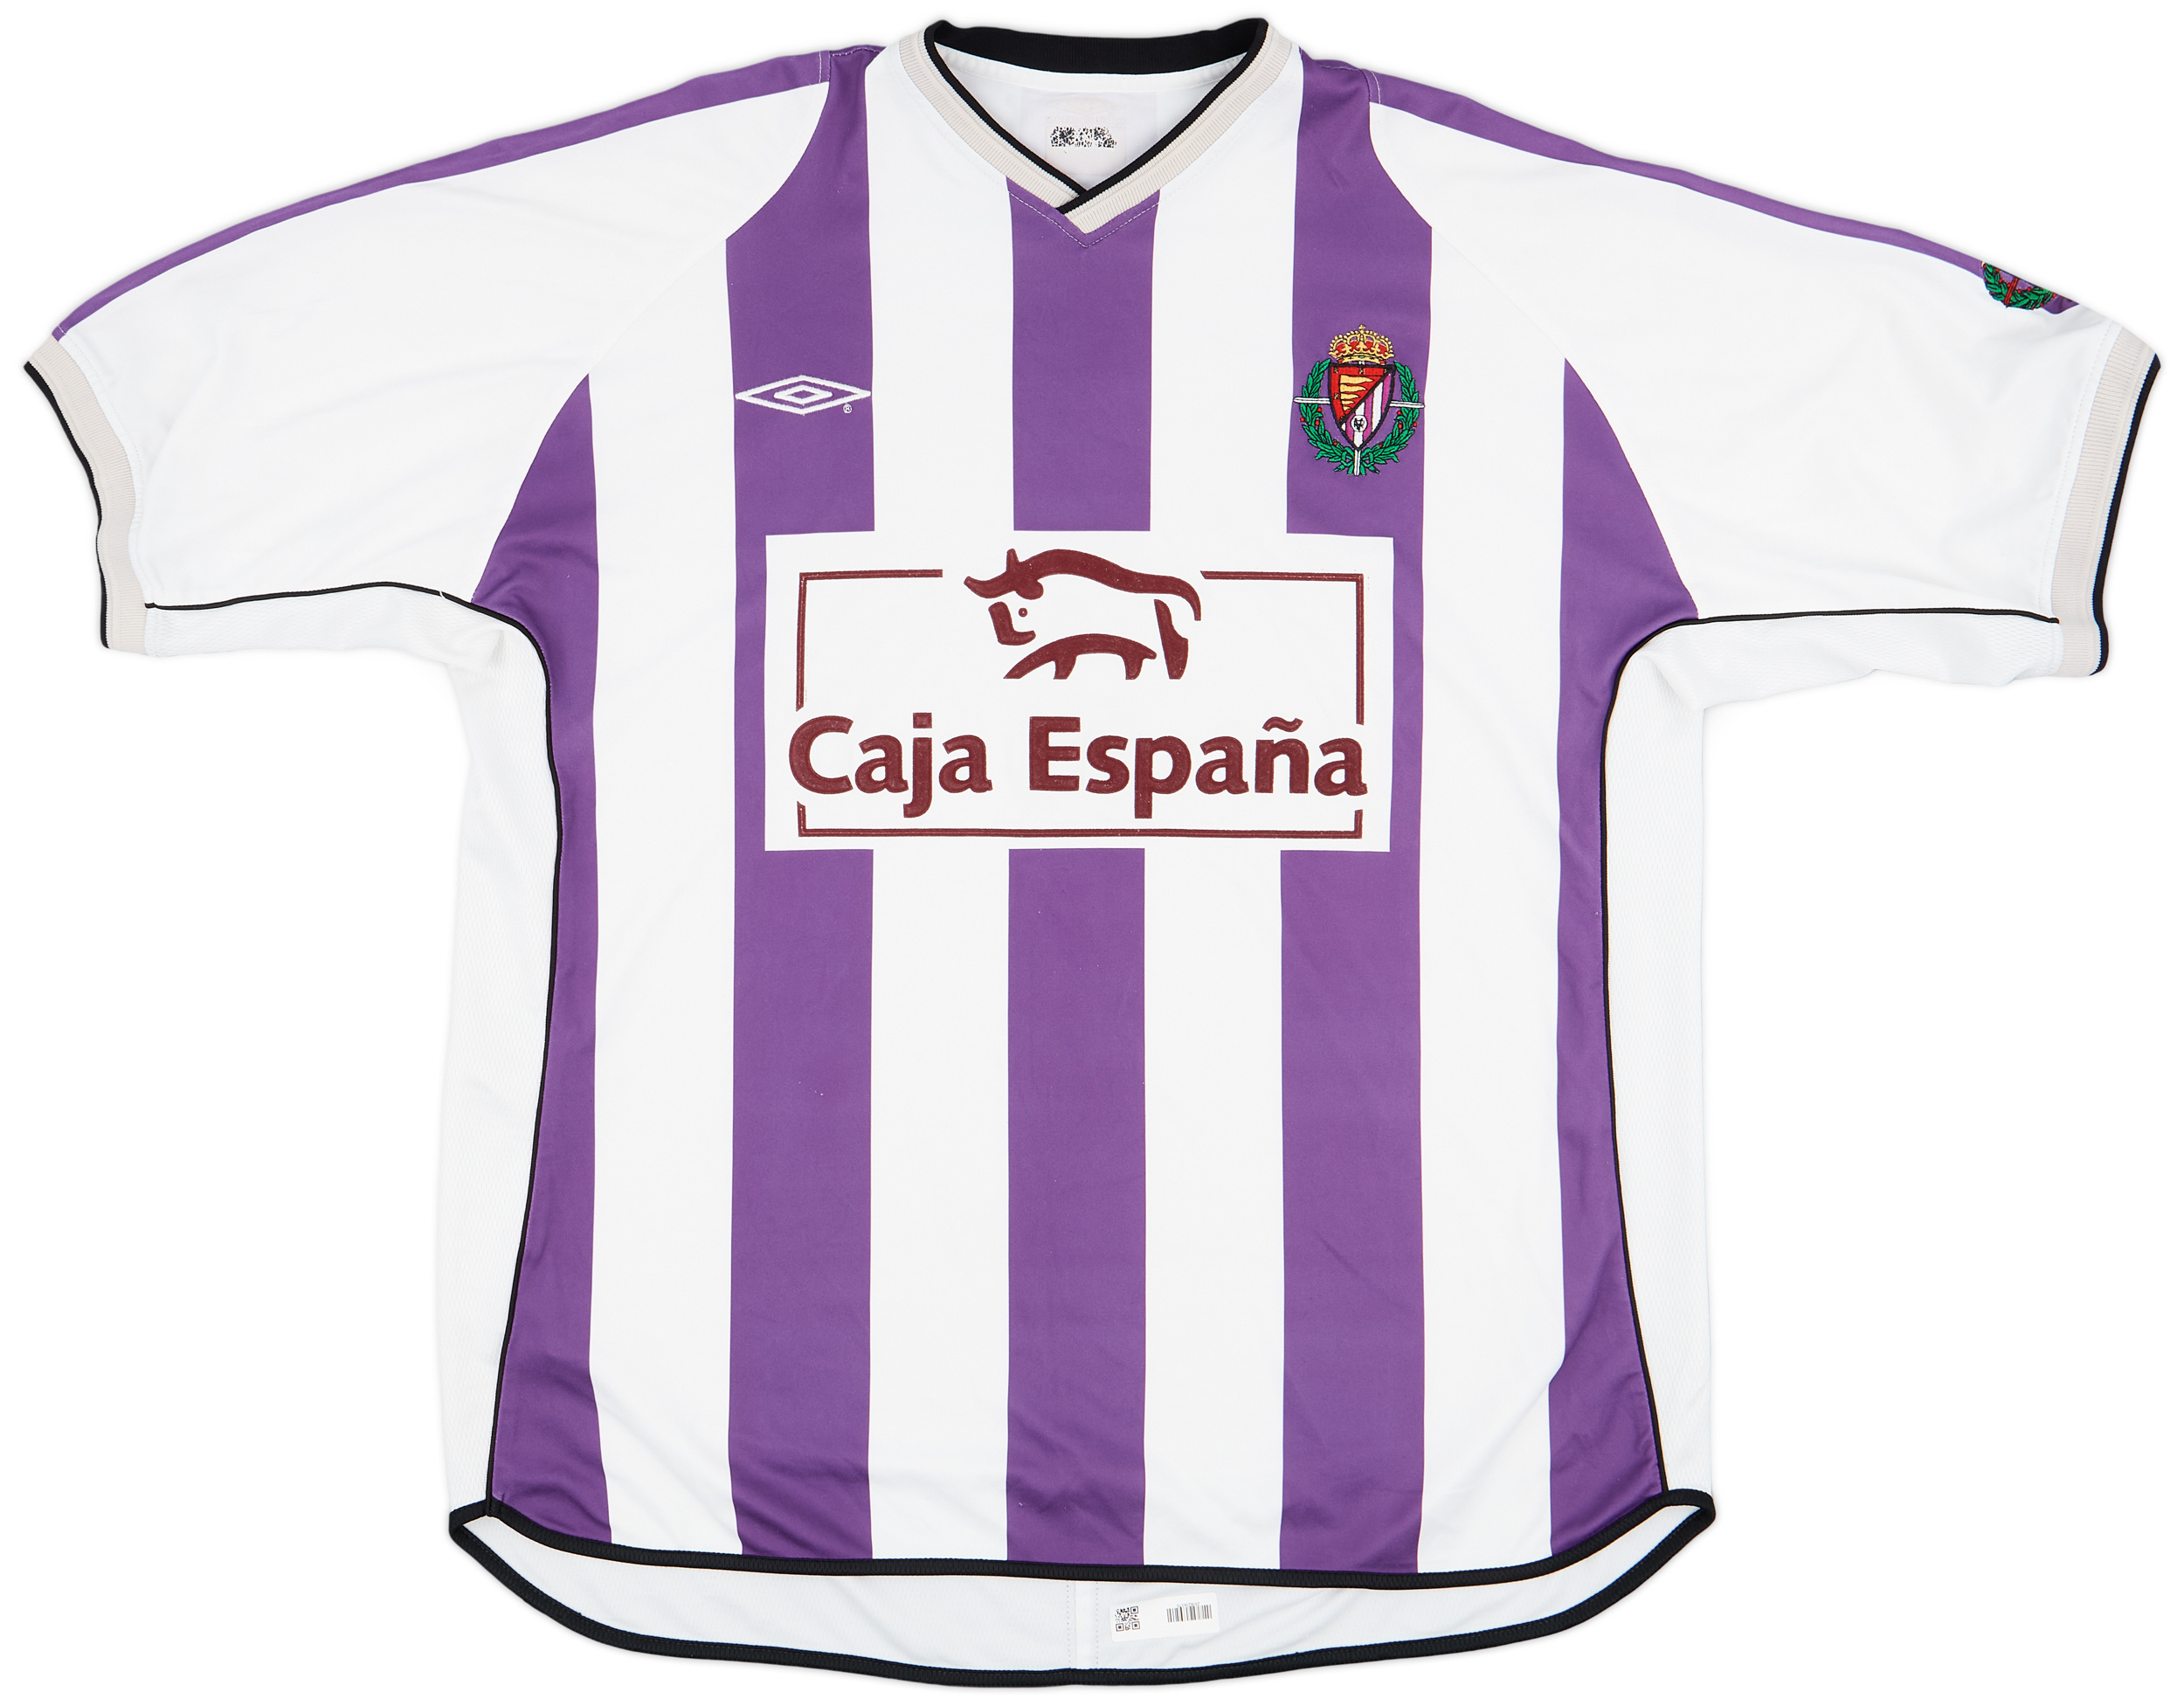 2001-03 Real Valladolid Home Shirt - 9/10 - ()